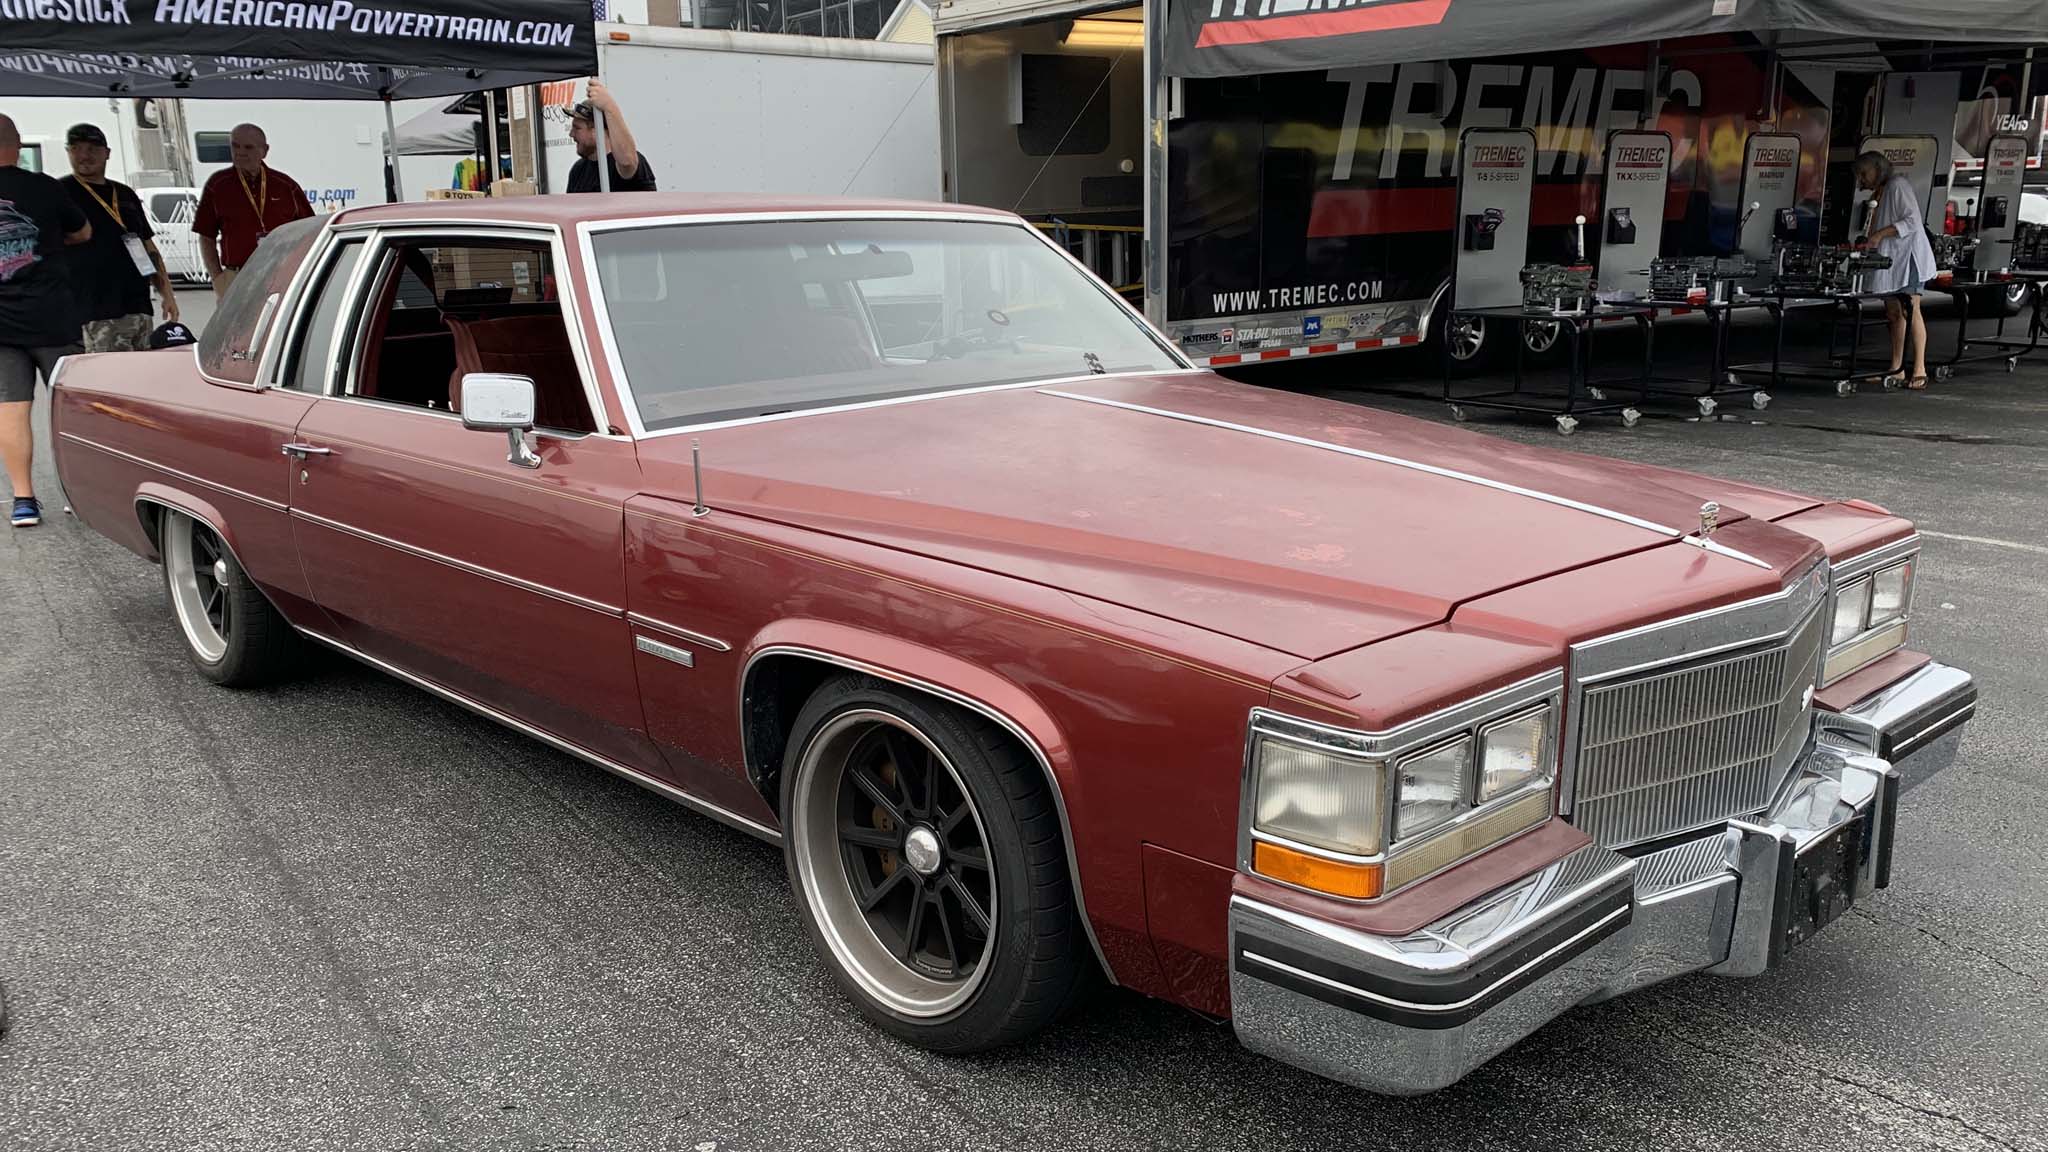 001-1983-cadillac-coupe-deville-caddy-chicken-coupe-american-powertrain-ls-swap-6-speed-manual-tremec-magnum-holley-baer-pro-touring-warhawk-427.jpg